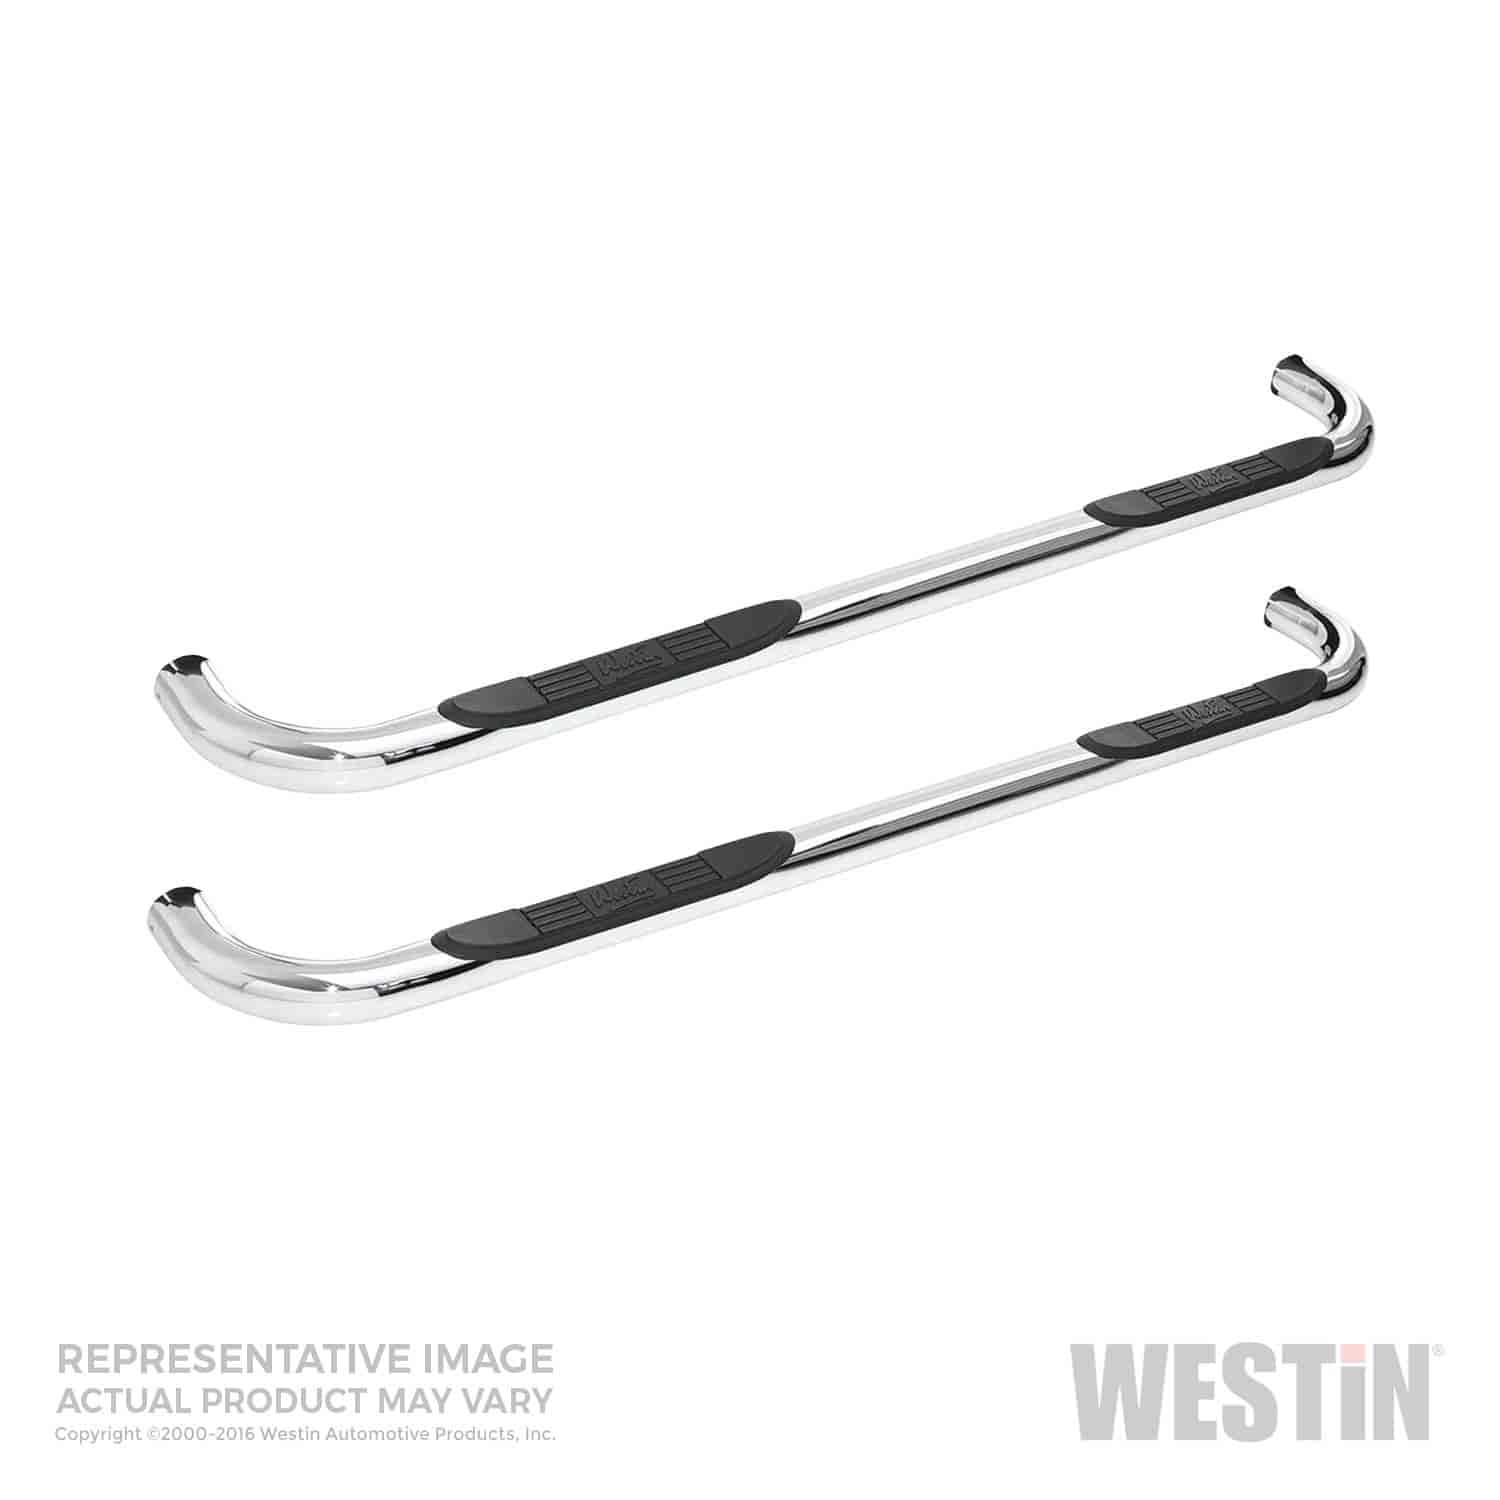 Signature Series Nerf Bars 2005-14 for Nissan Frontier, Crew Cab